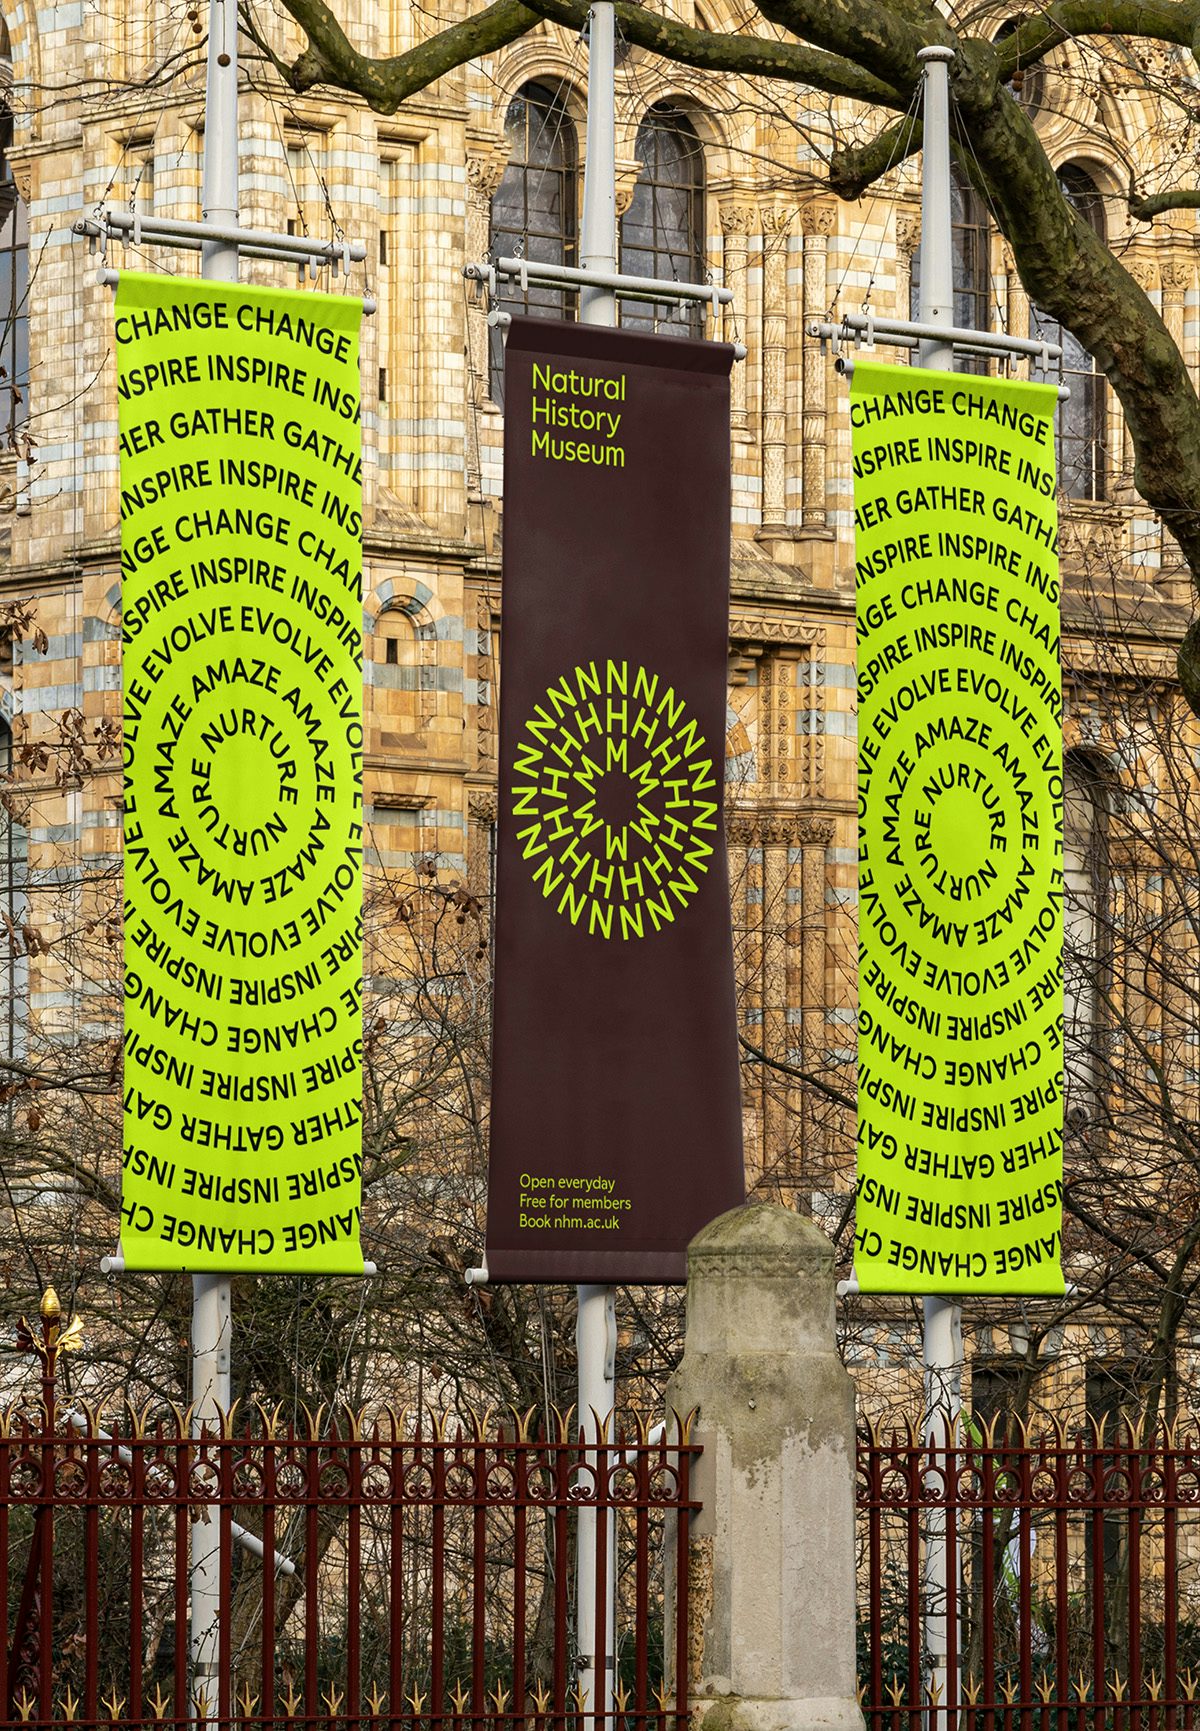 Image shows the new Natural History Museum branding on vertical outdoor banners, showing the initials 'NHM' arranged in concentric circles on a neon yellow background, and one with the letters in neon yellow on a dark grey background